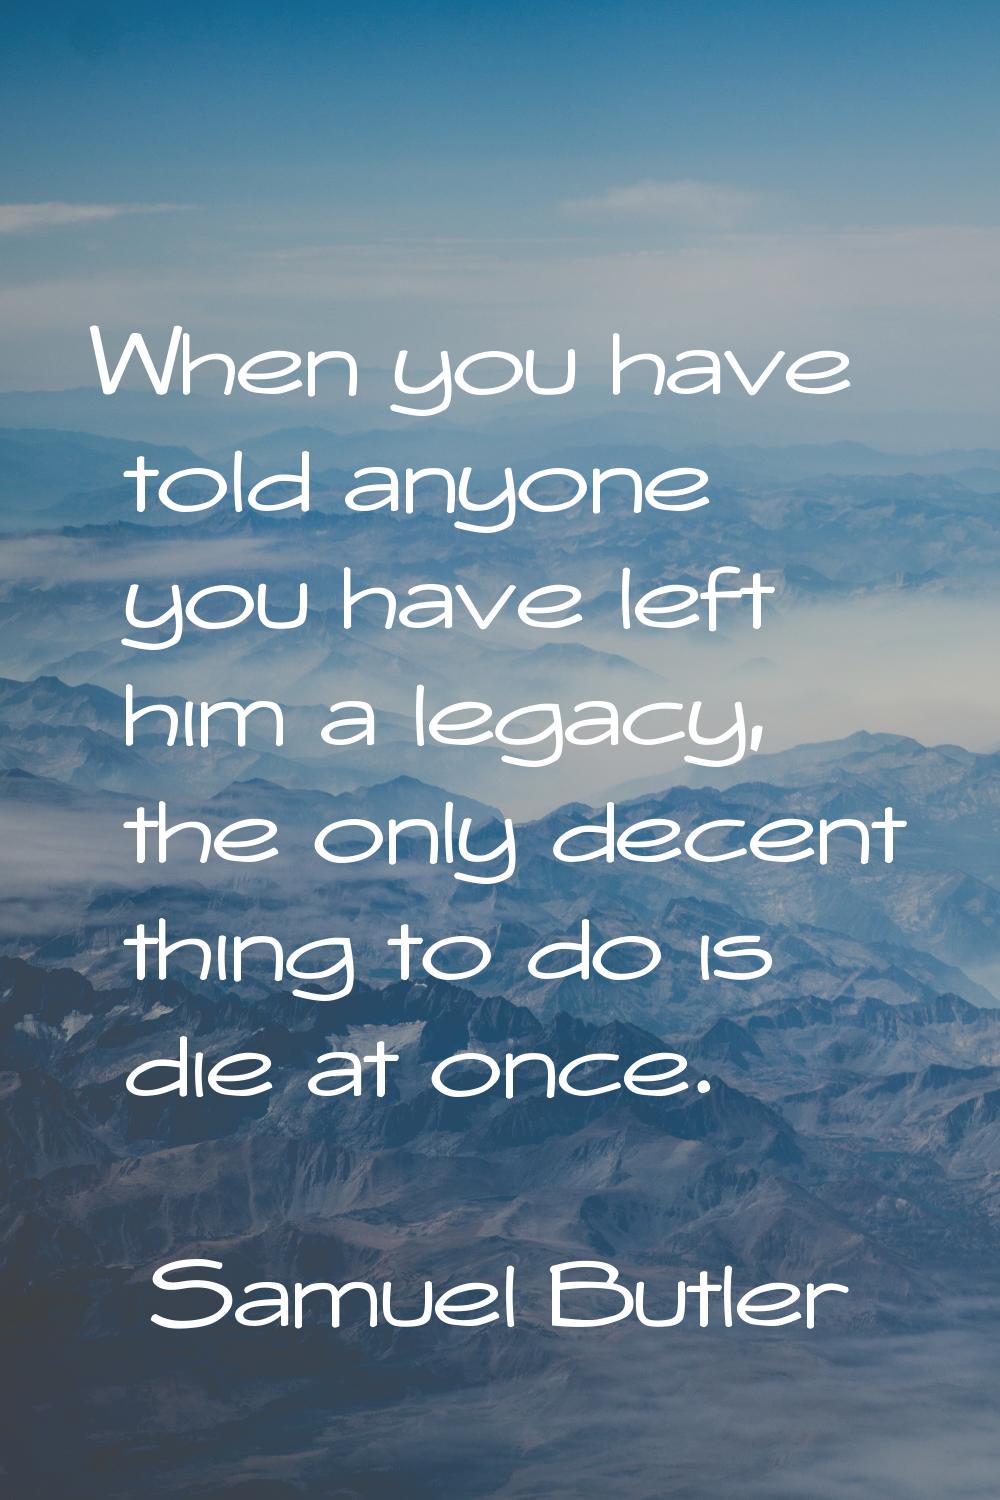 When you have told anyone you have left him a legacy, the only decent thing to do is die at once.